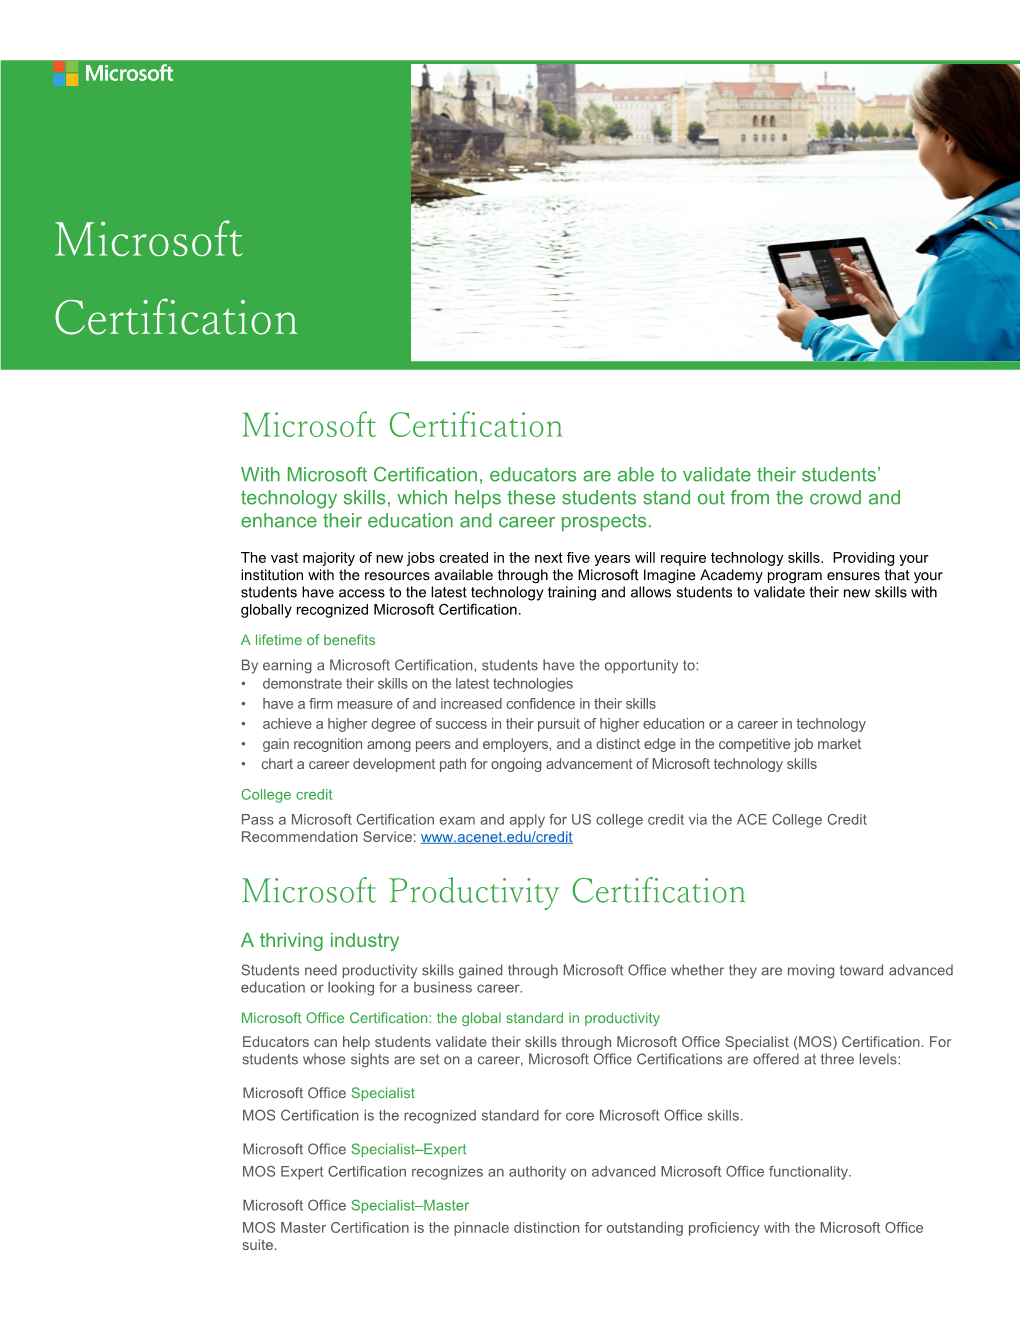 By Earning a Microsoft Certification, Students Have the Opportunity To